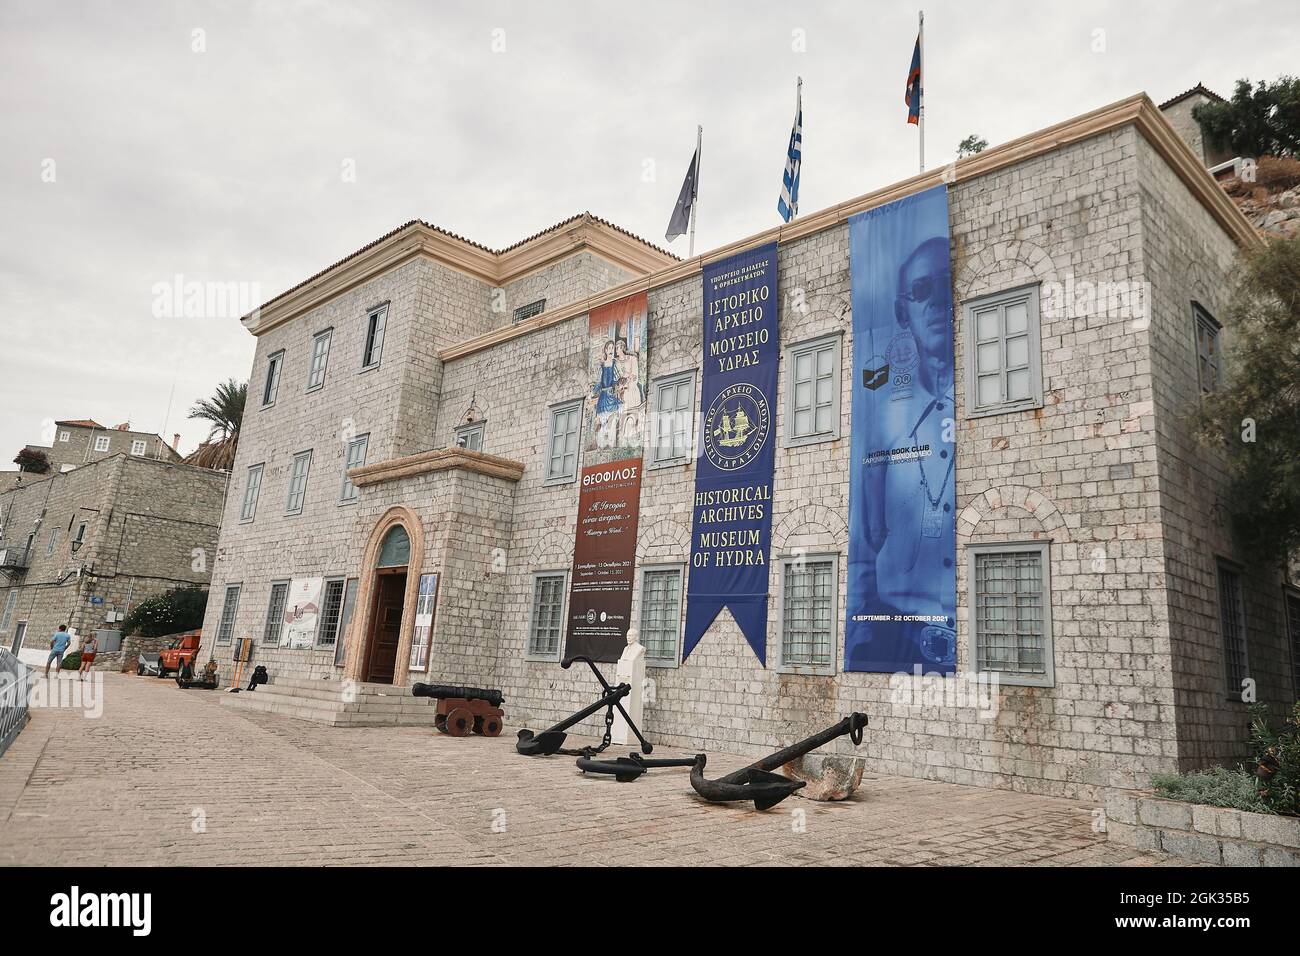 The Historic Archives and Museum of Hydra building, Hydra Island, Greece Stock Photo